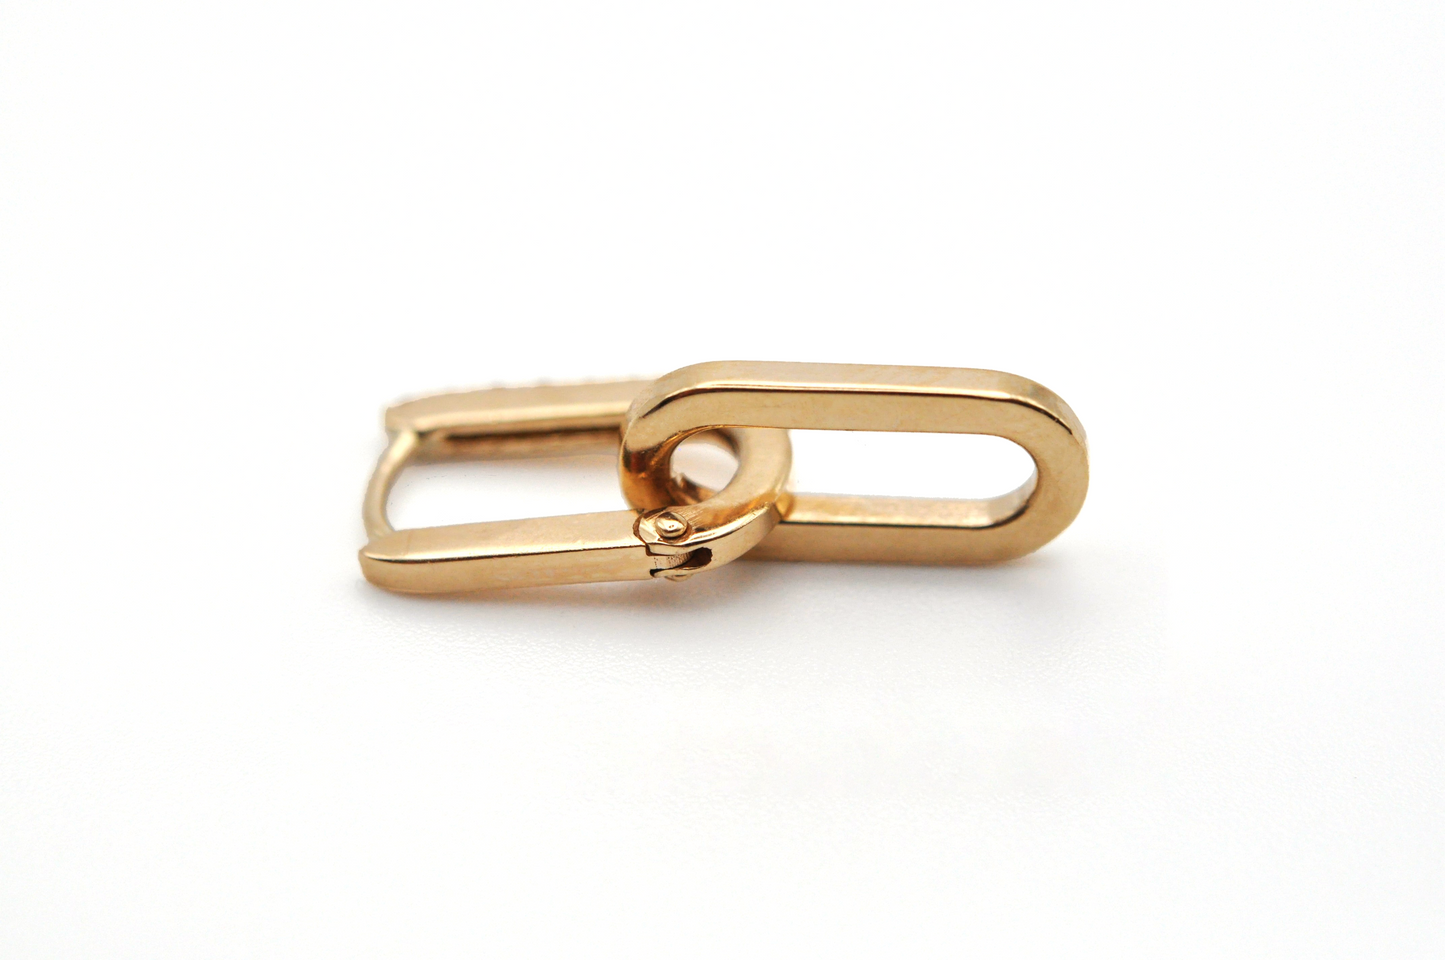 Gold Paperclip Earrings with Diamonds